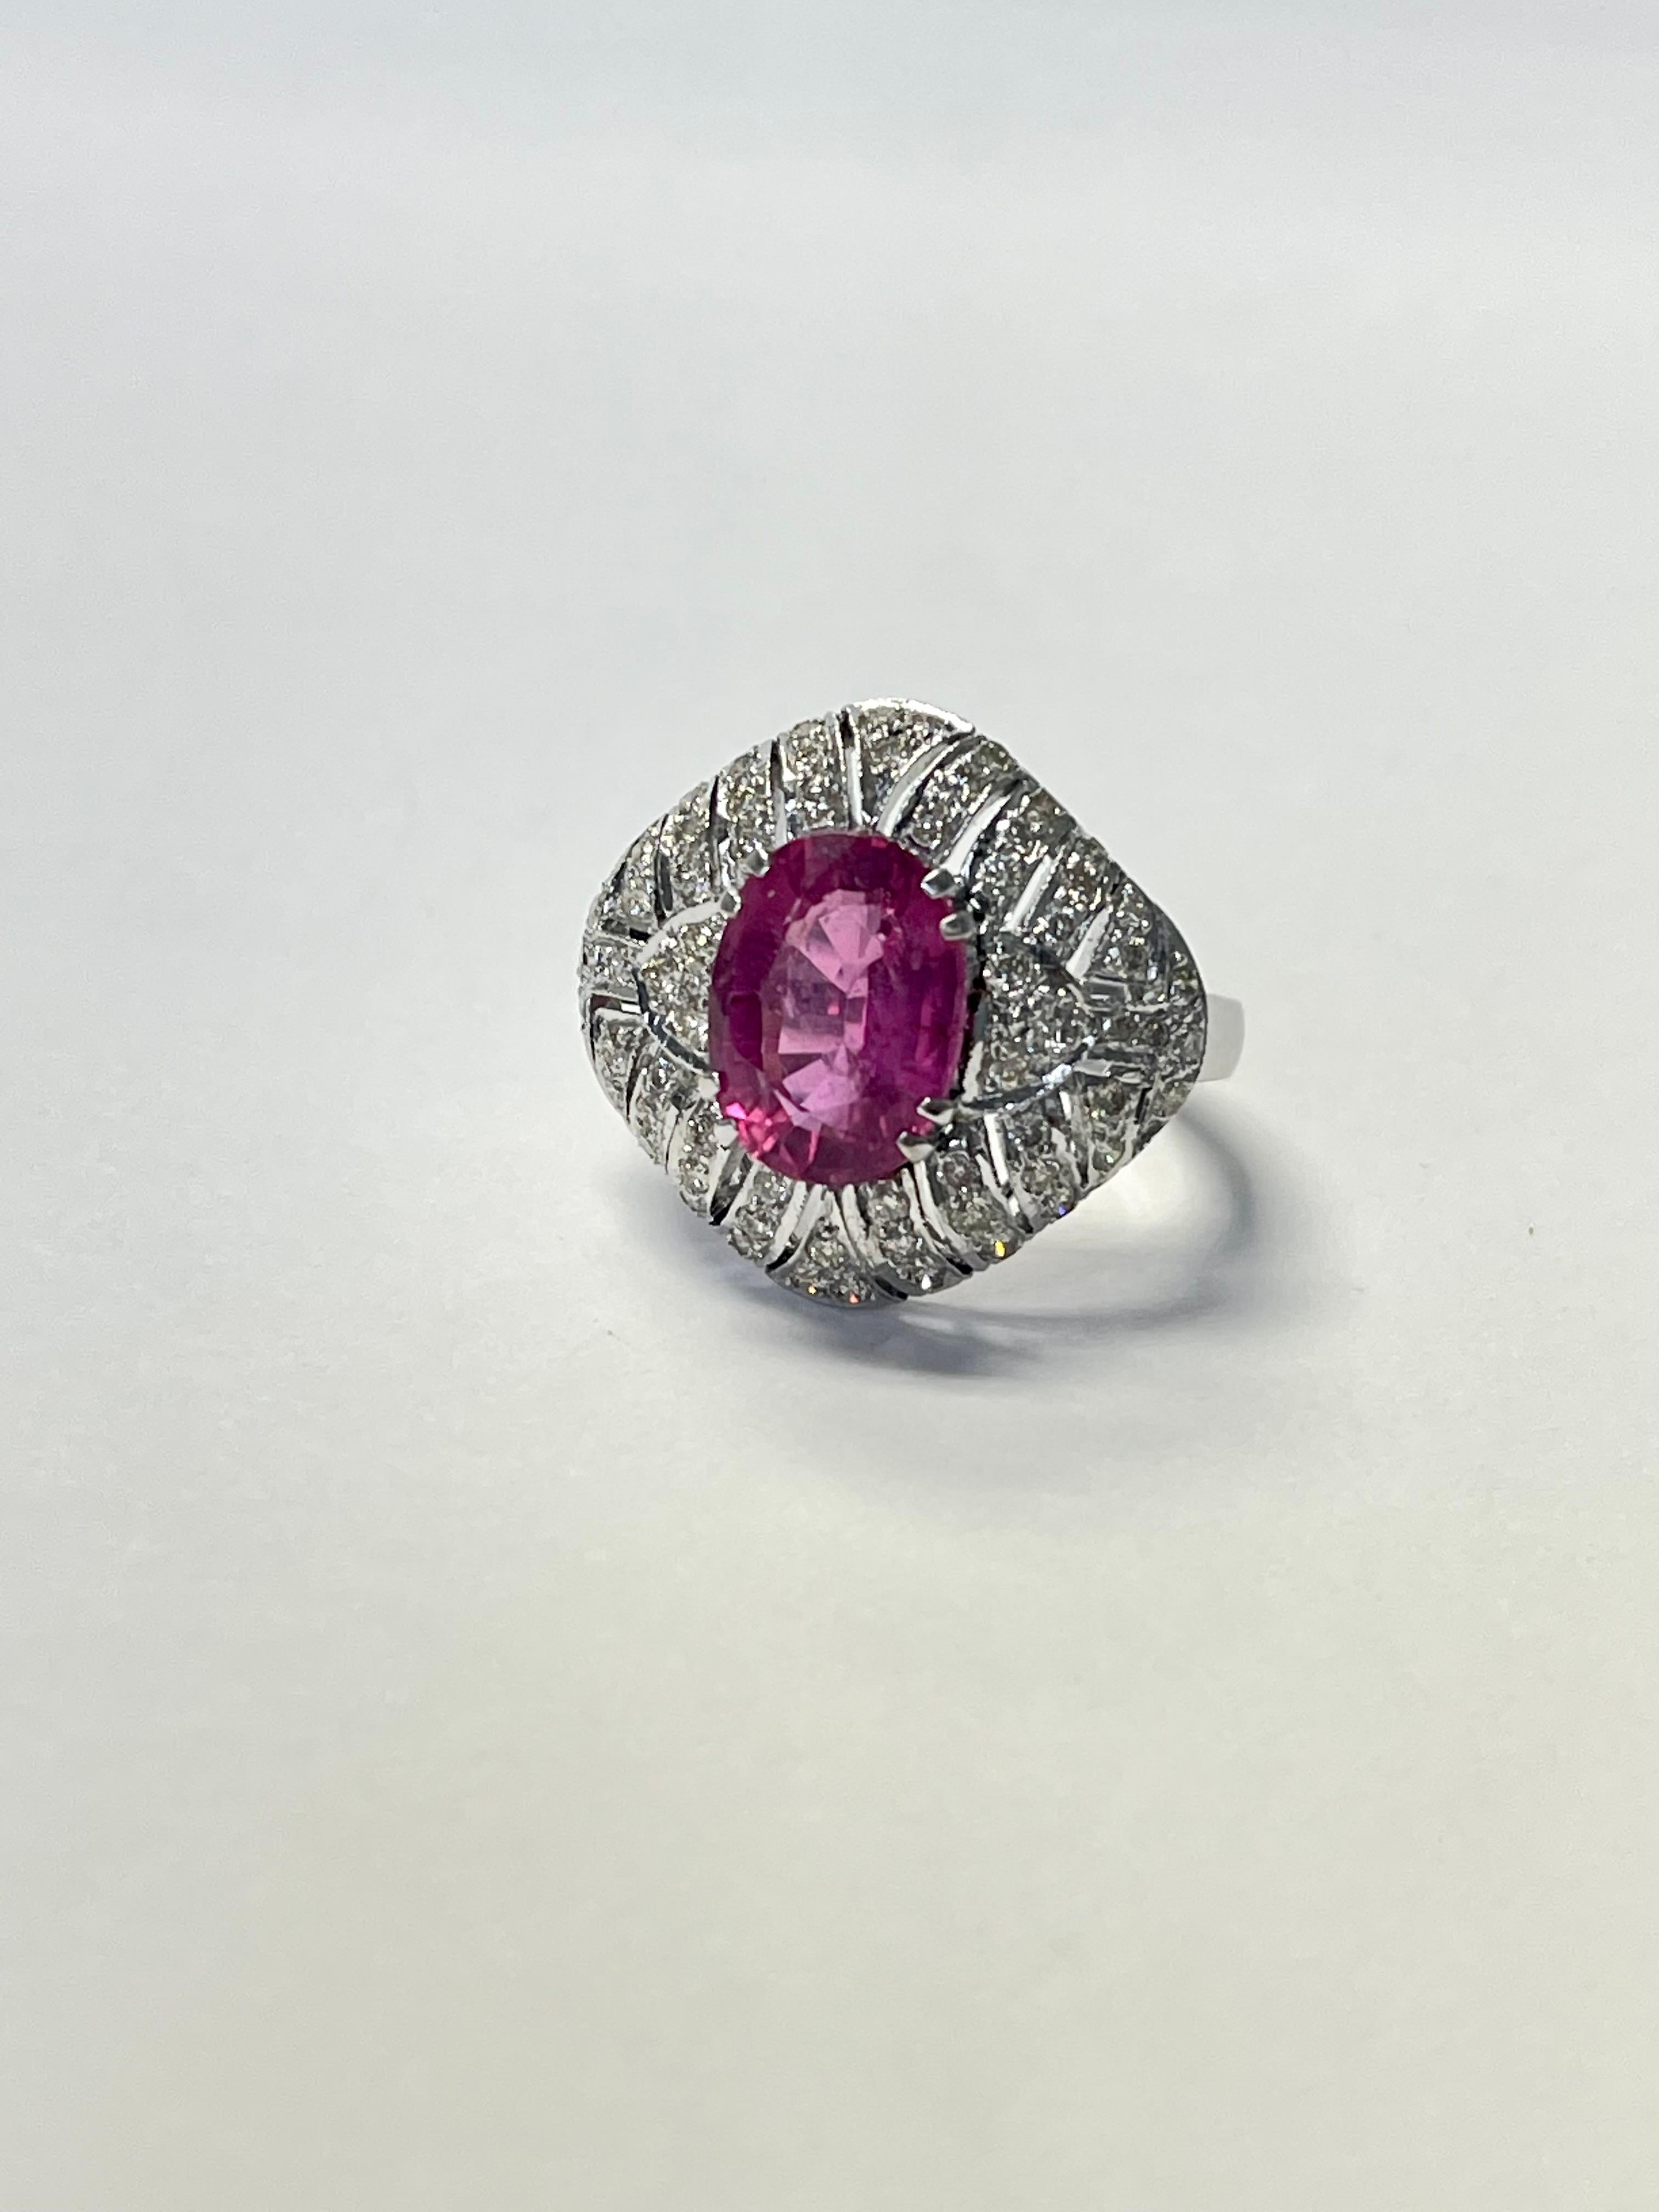 Men's 1920 Art Deco Diamond and Oval Rubellite Engagement Ring in 18K White Gold For Sale